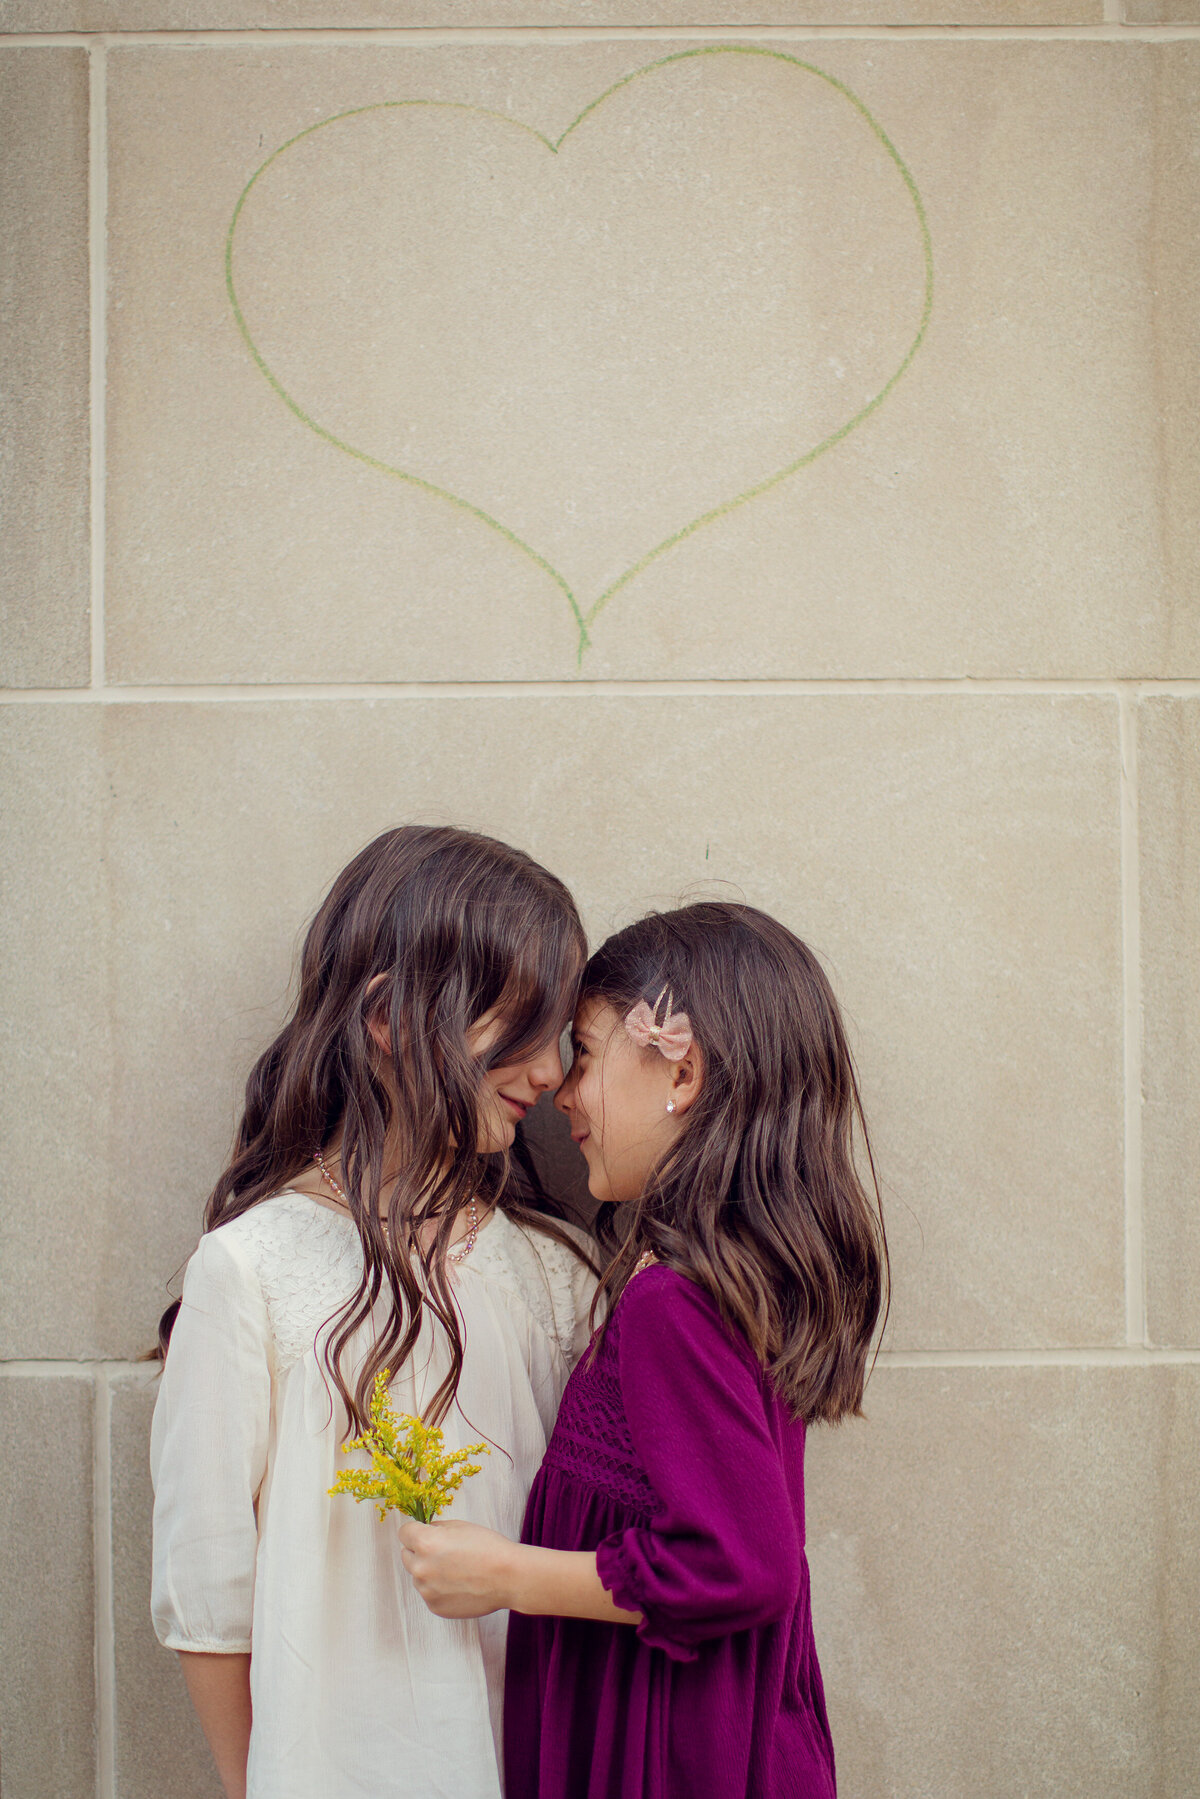 Two sisters in dresses are face to face in downtown Indy against a concrete wall that has a green heart on it.